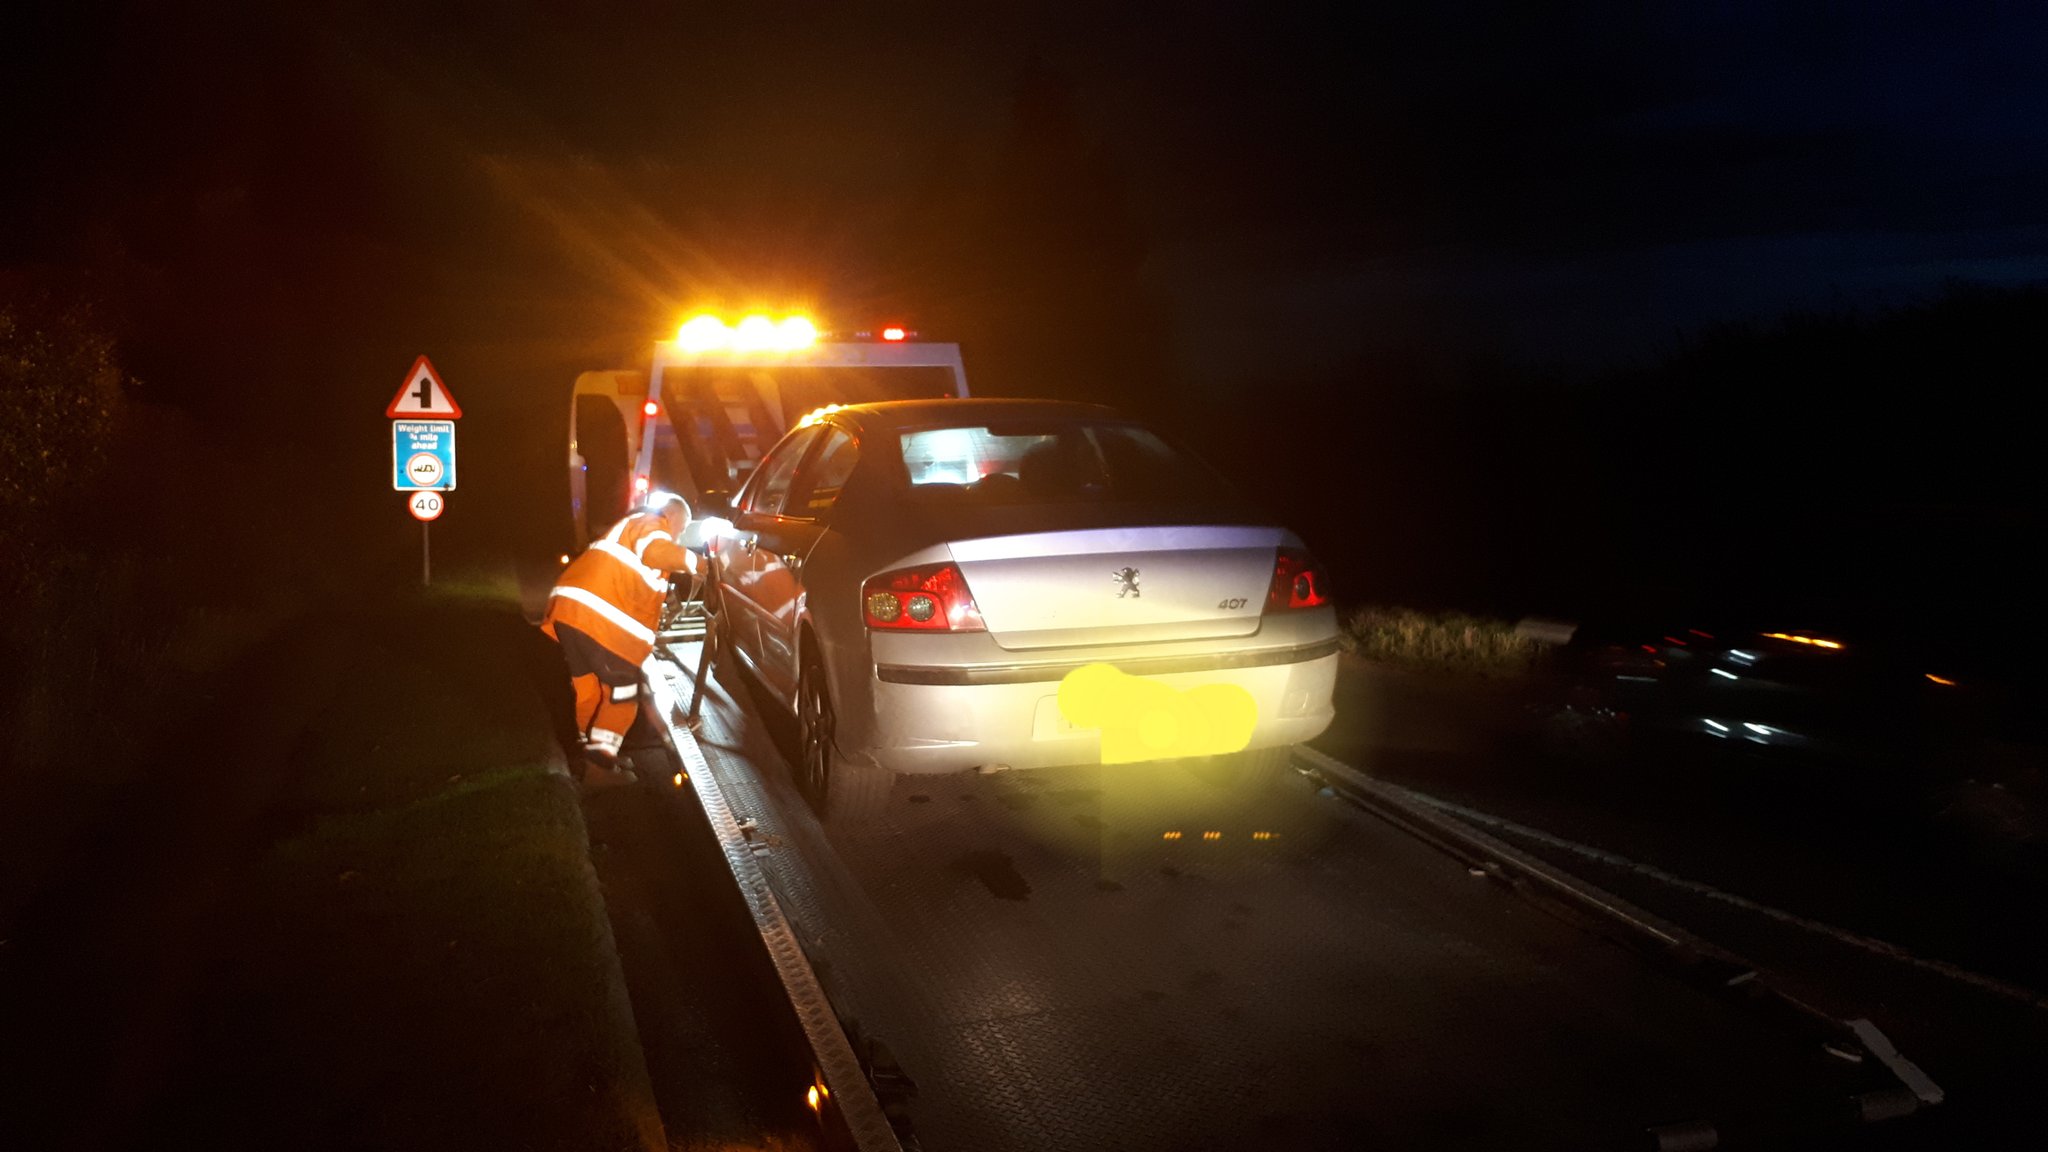 NEWS | Vehicle seized by police in Herefordshire this evening